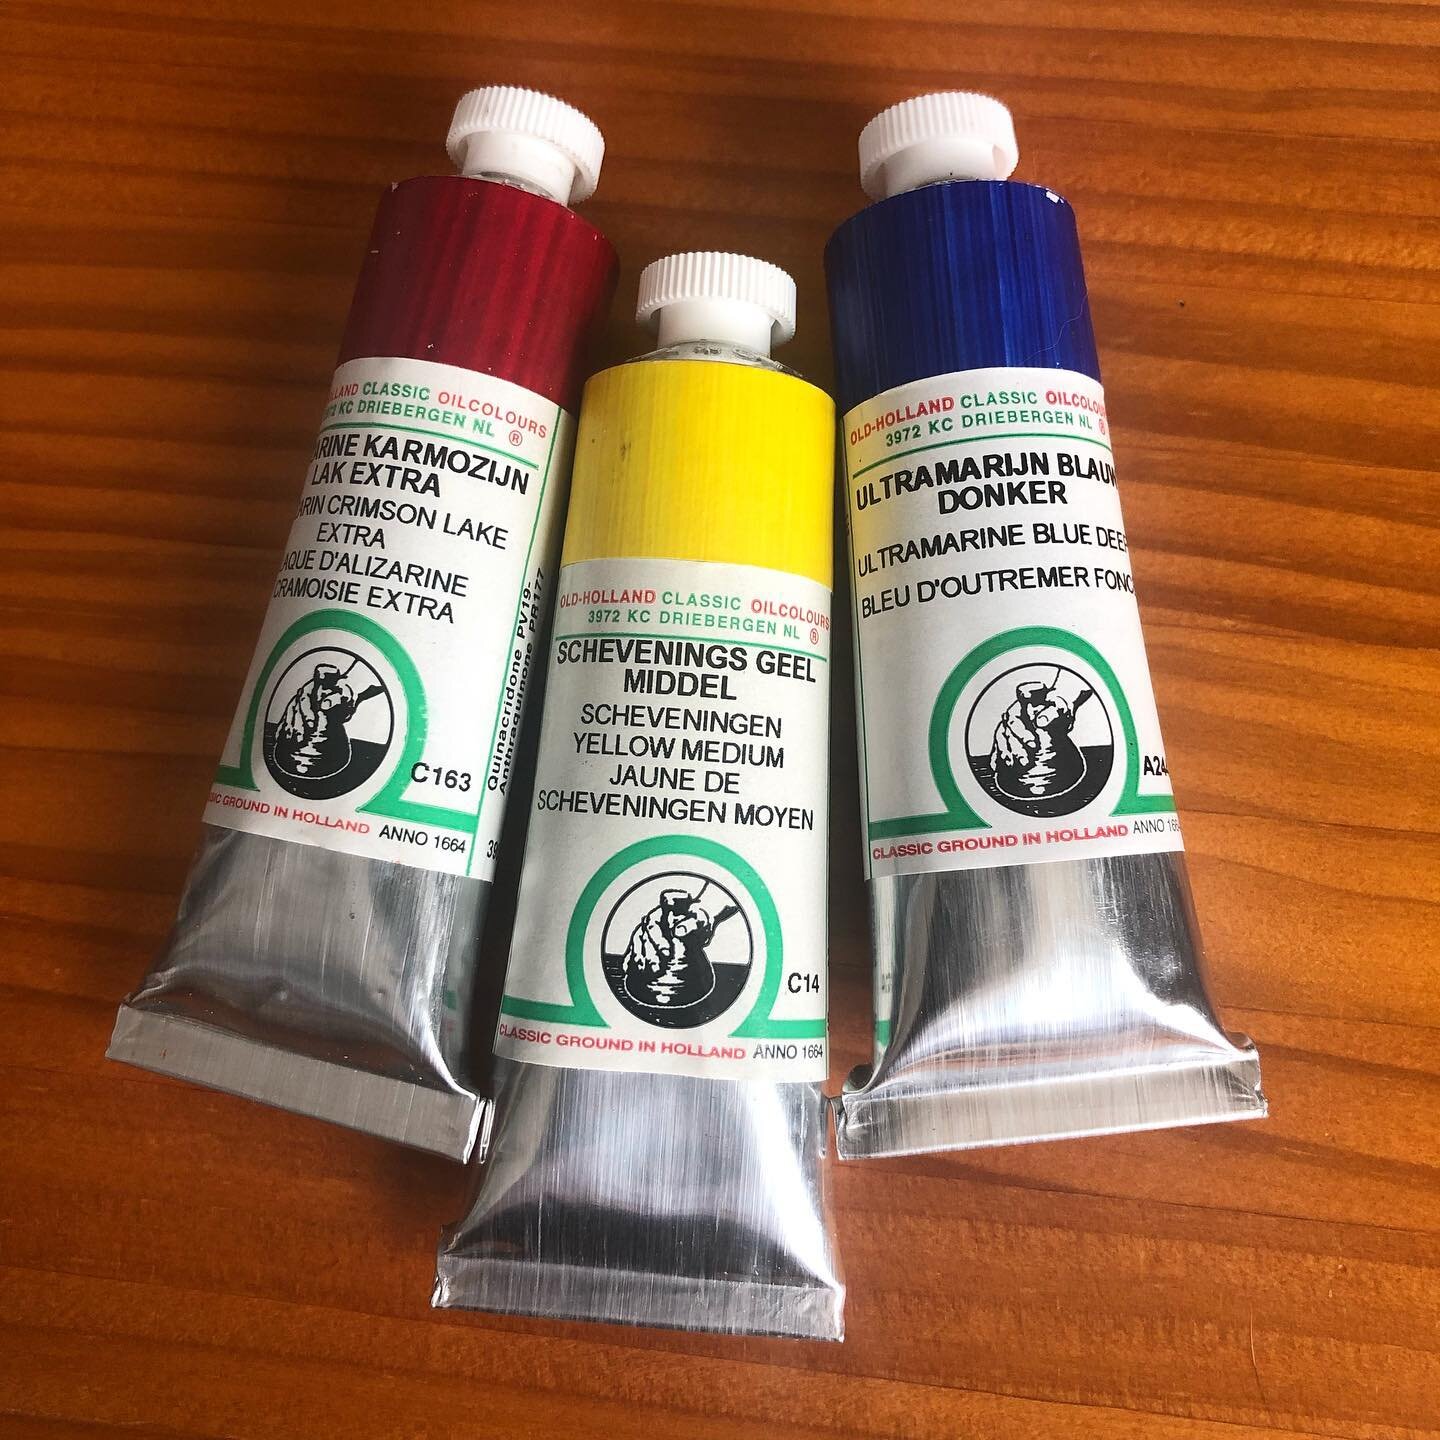 Can&rsquo;t wait to tryout these new @oldhollandcolours paints!! Such a lovely birthday gift from a dear friend 🥰 I know what my next limited palette is going to be!
&bull;
#oilpainting #stilllifepainting #artistsoninstagram #oldhollandpaints #oldho